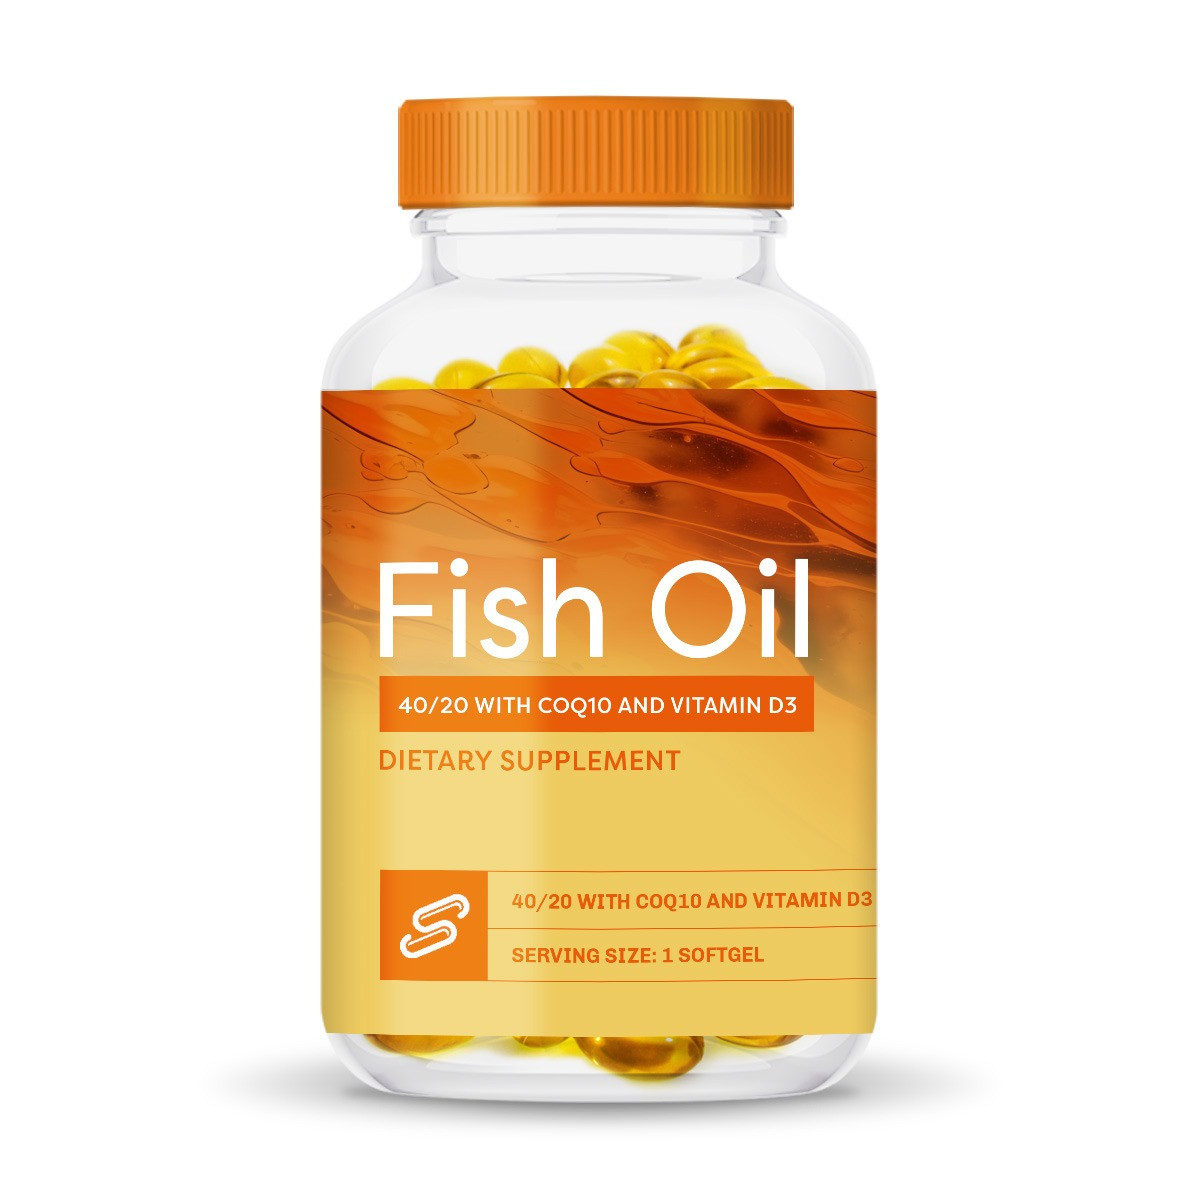 Fish Oil 40/20 with CoQ10 and Vitamin D3